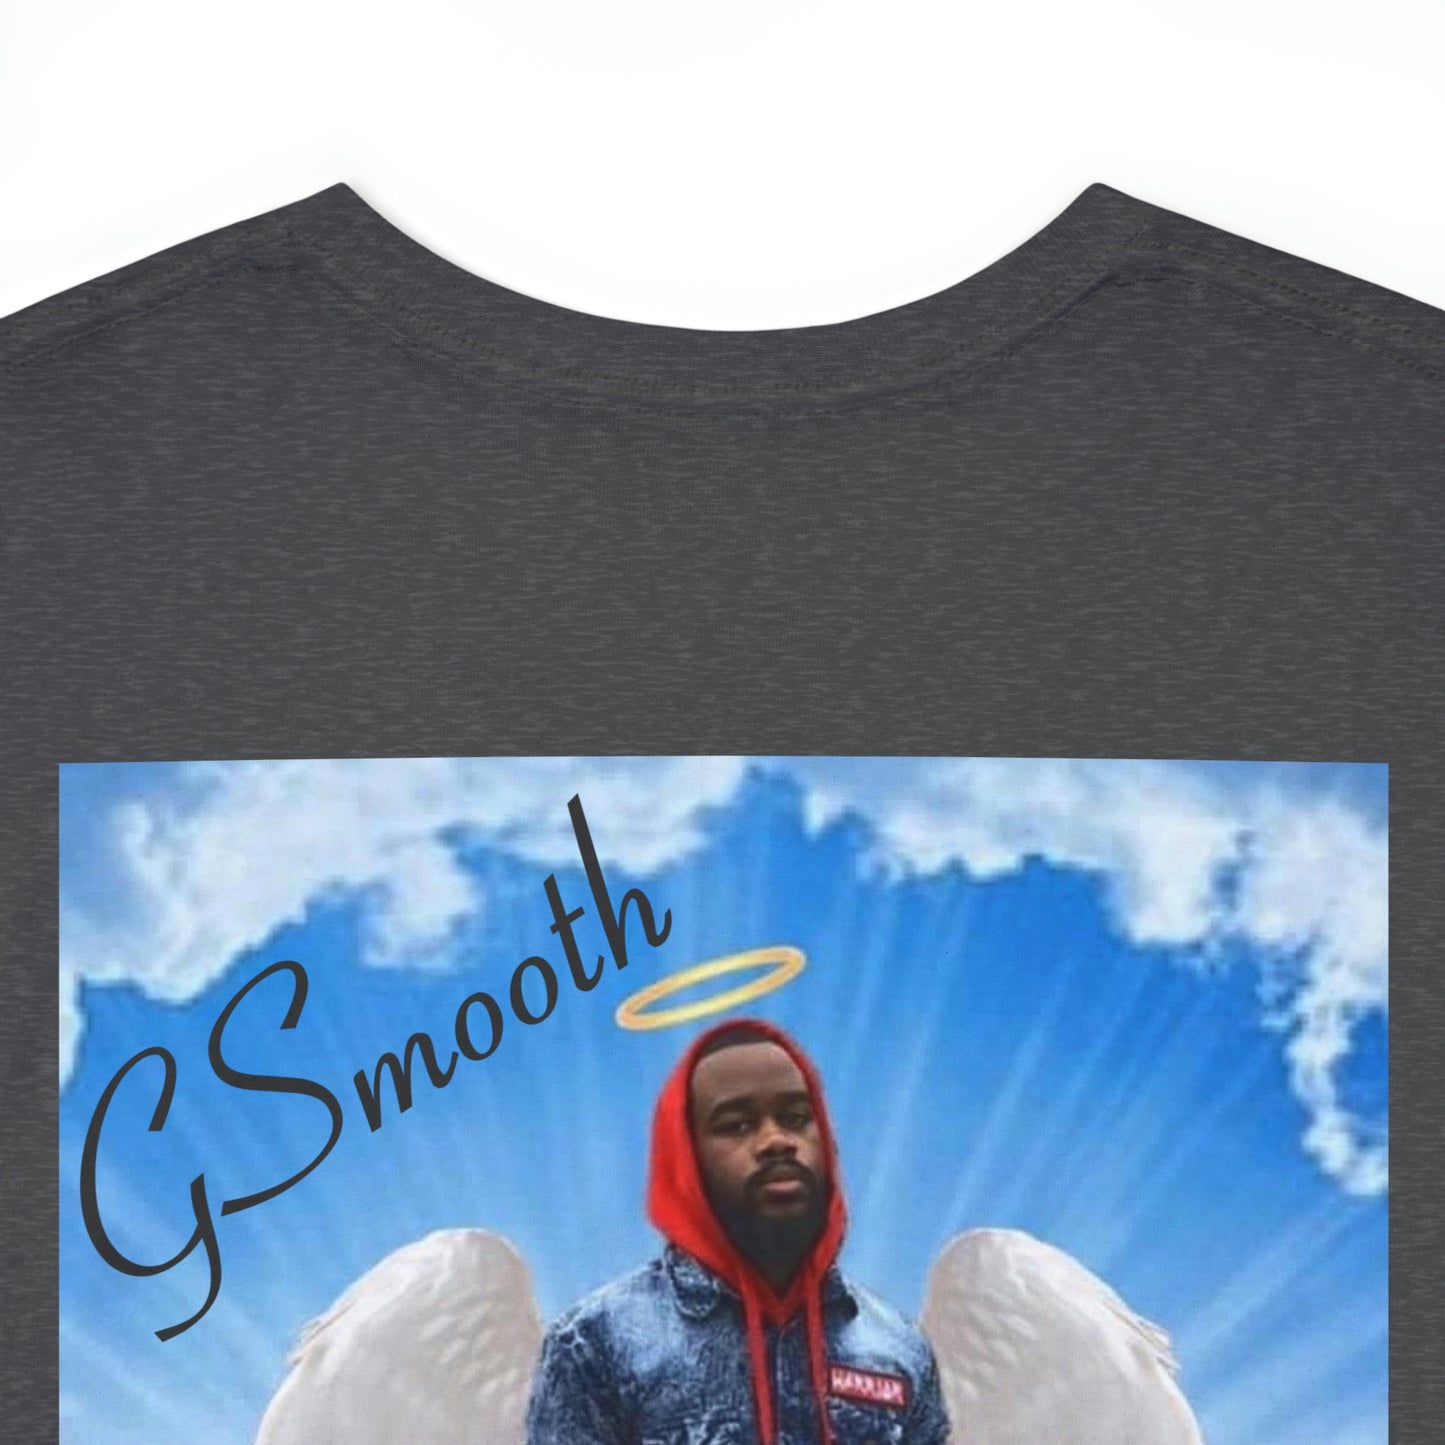 "GSmooth R.I.P Always Remembered"  Heavy Cotton Tee